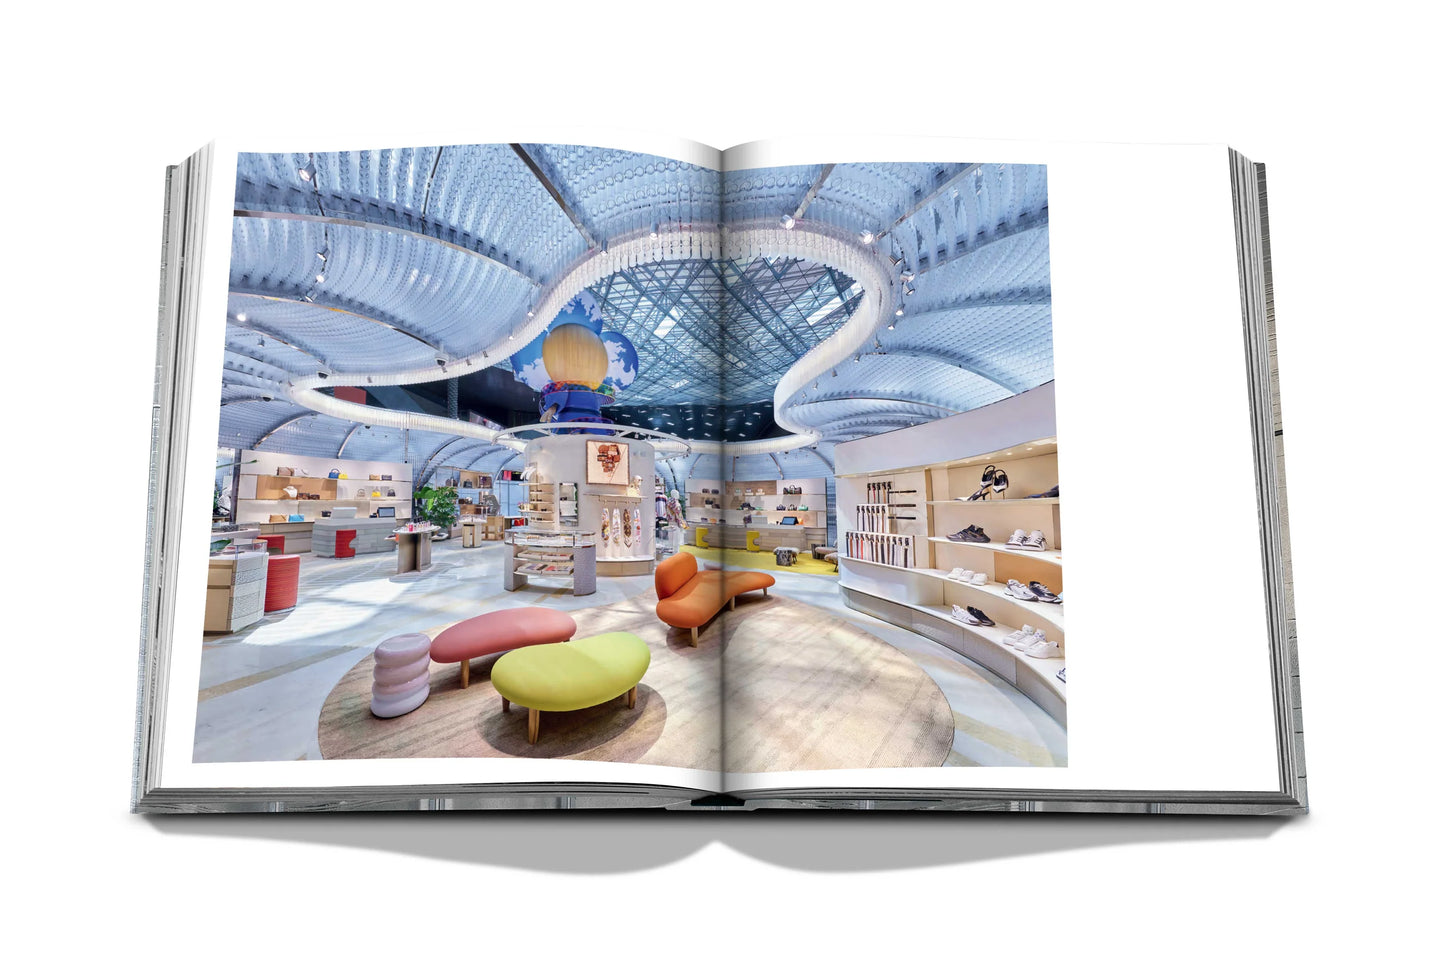 Louis Vuitton Skin: Architecture of Luxury (Singapore Edition) Editions ASSOULINE